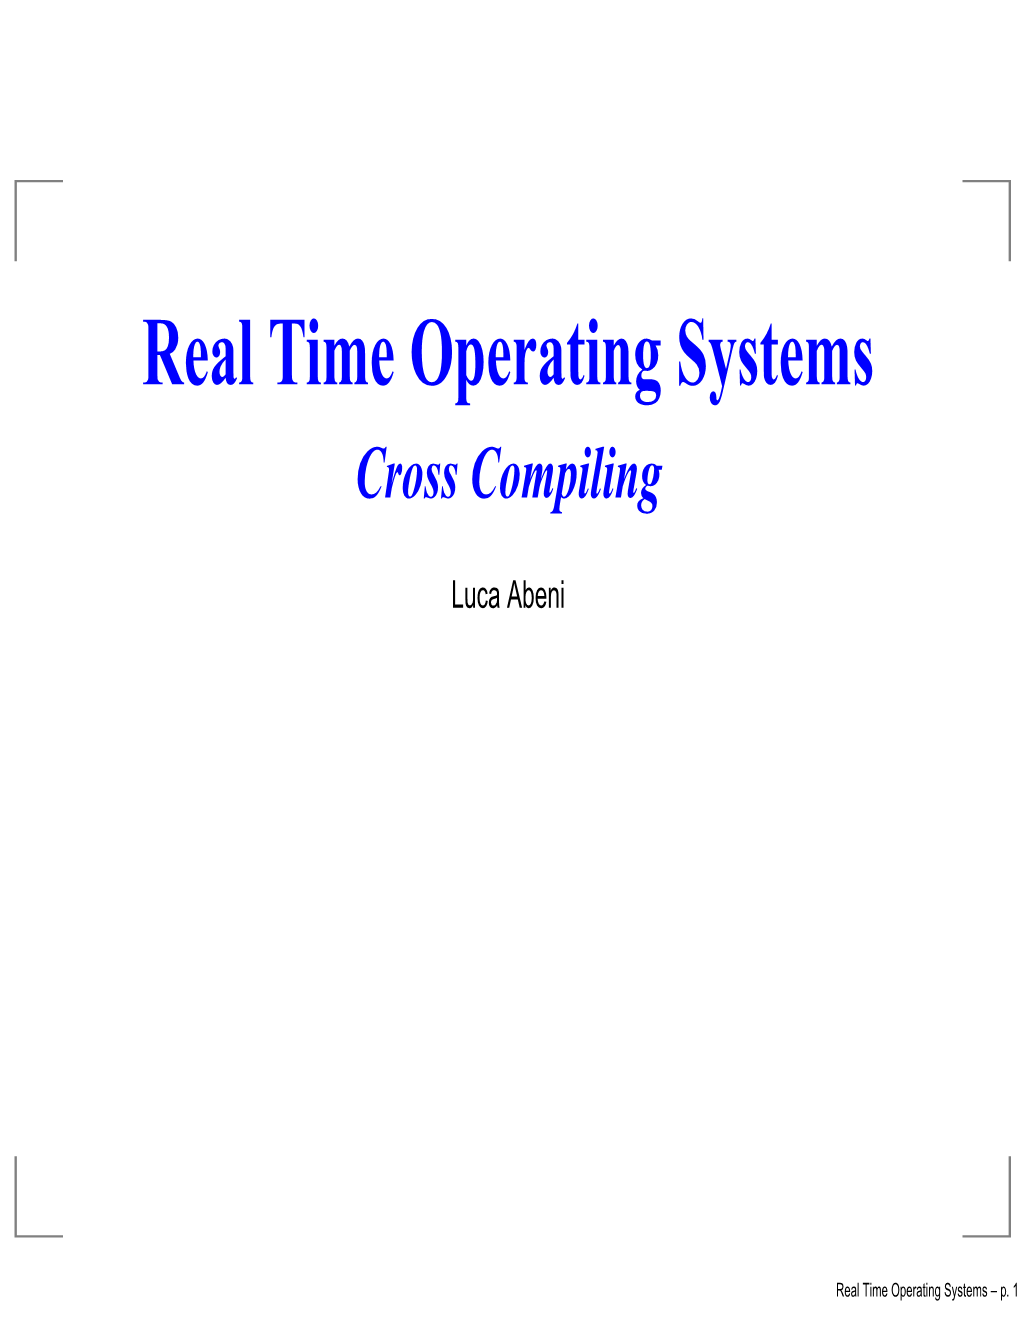 Real Time Operating Systems Cross Compiling